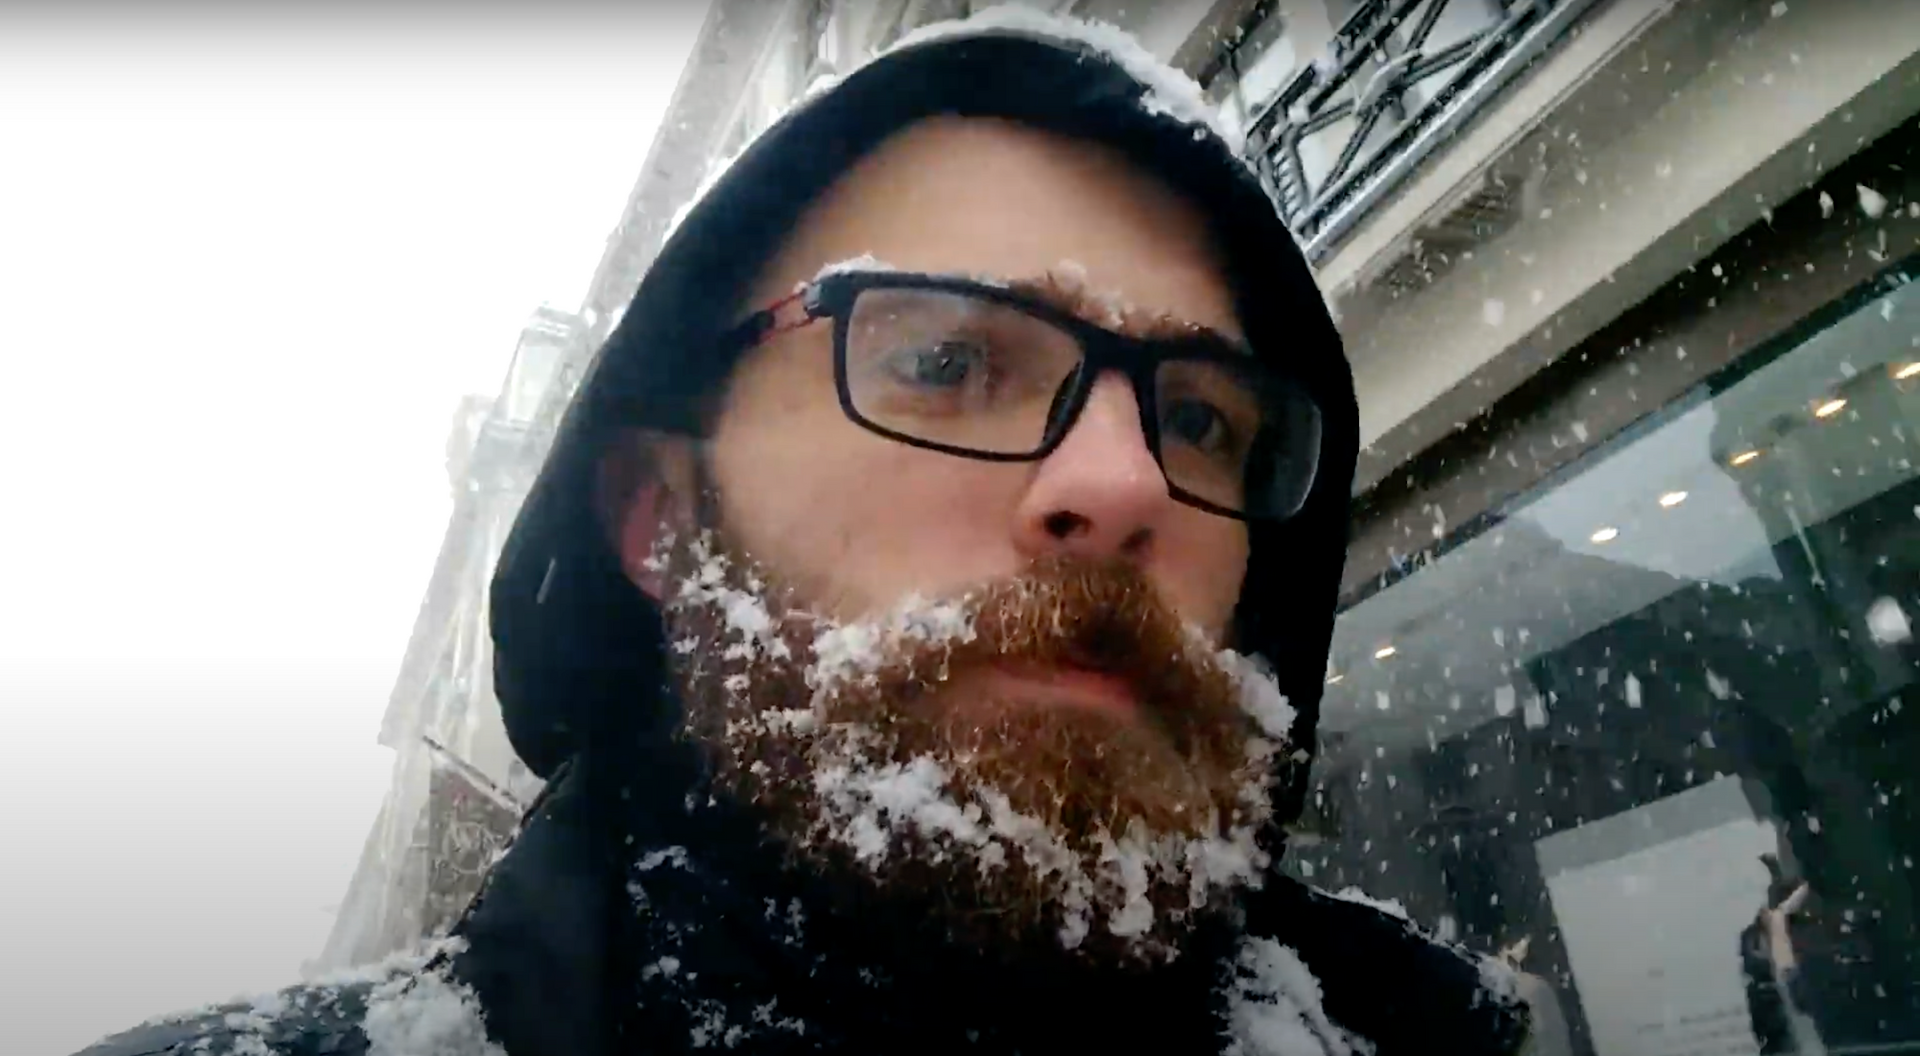 After walking through the streets of London I literally had icicles growing on my beard.